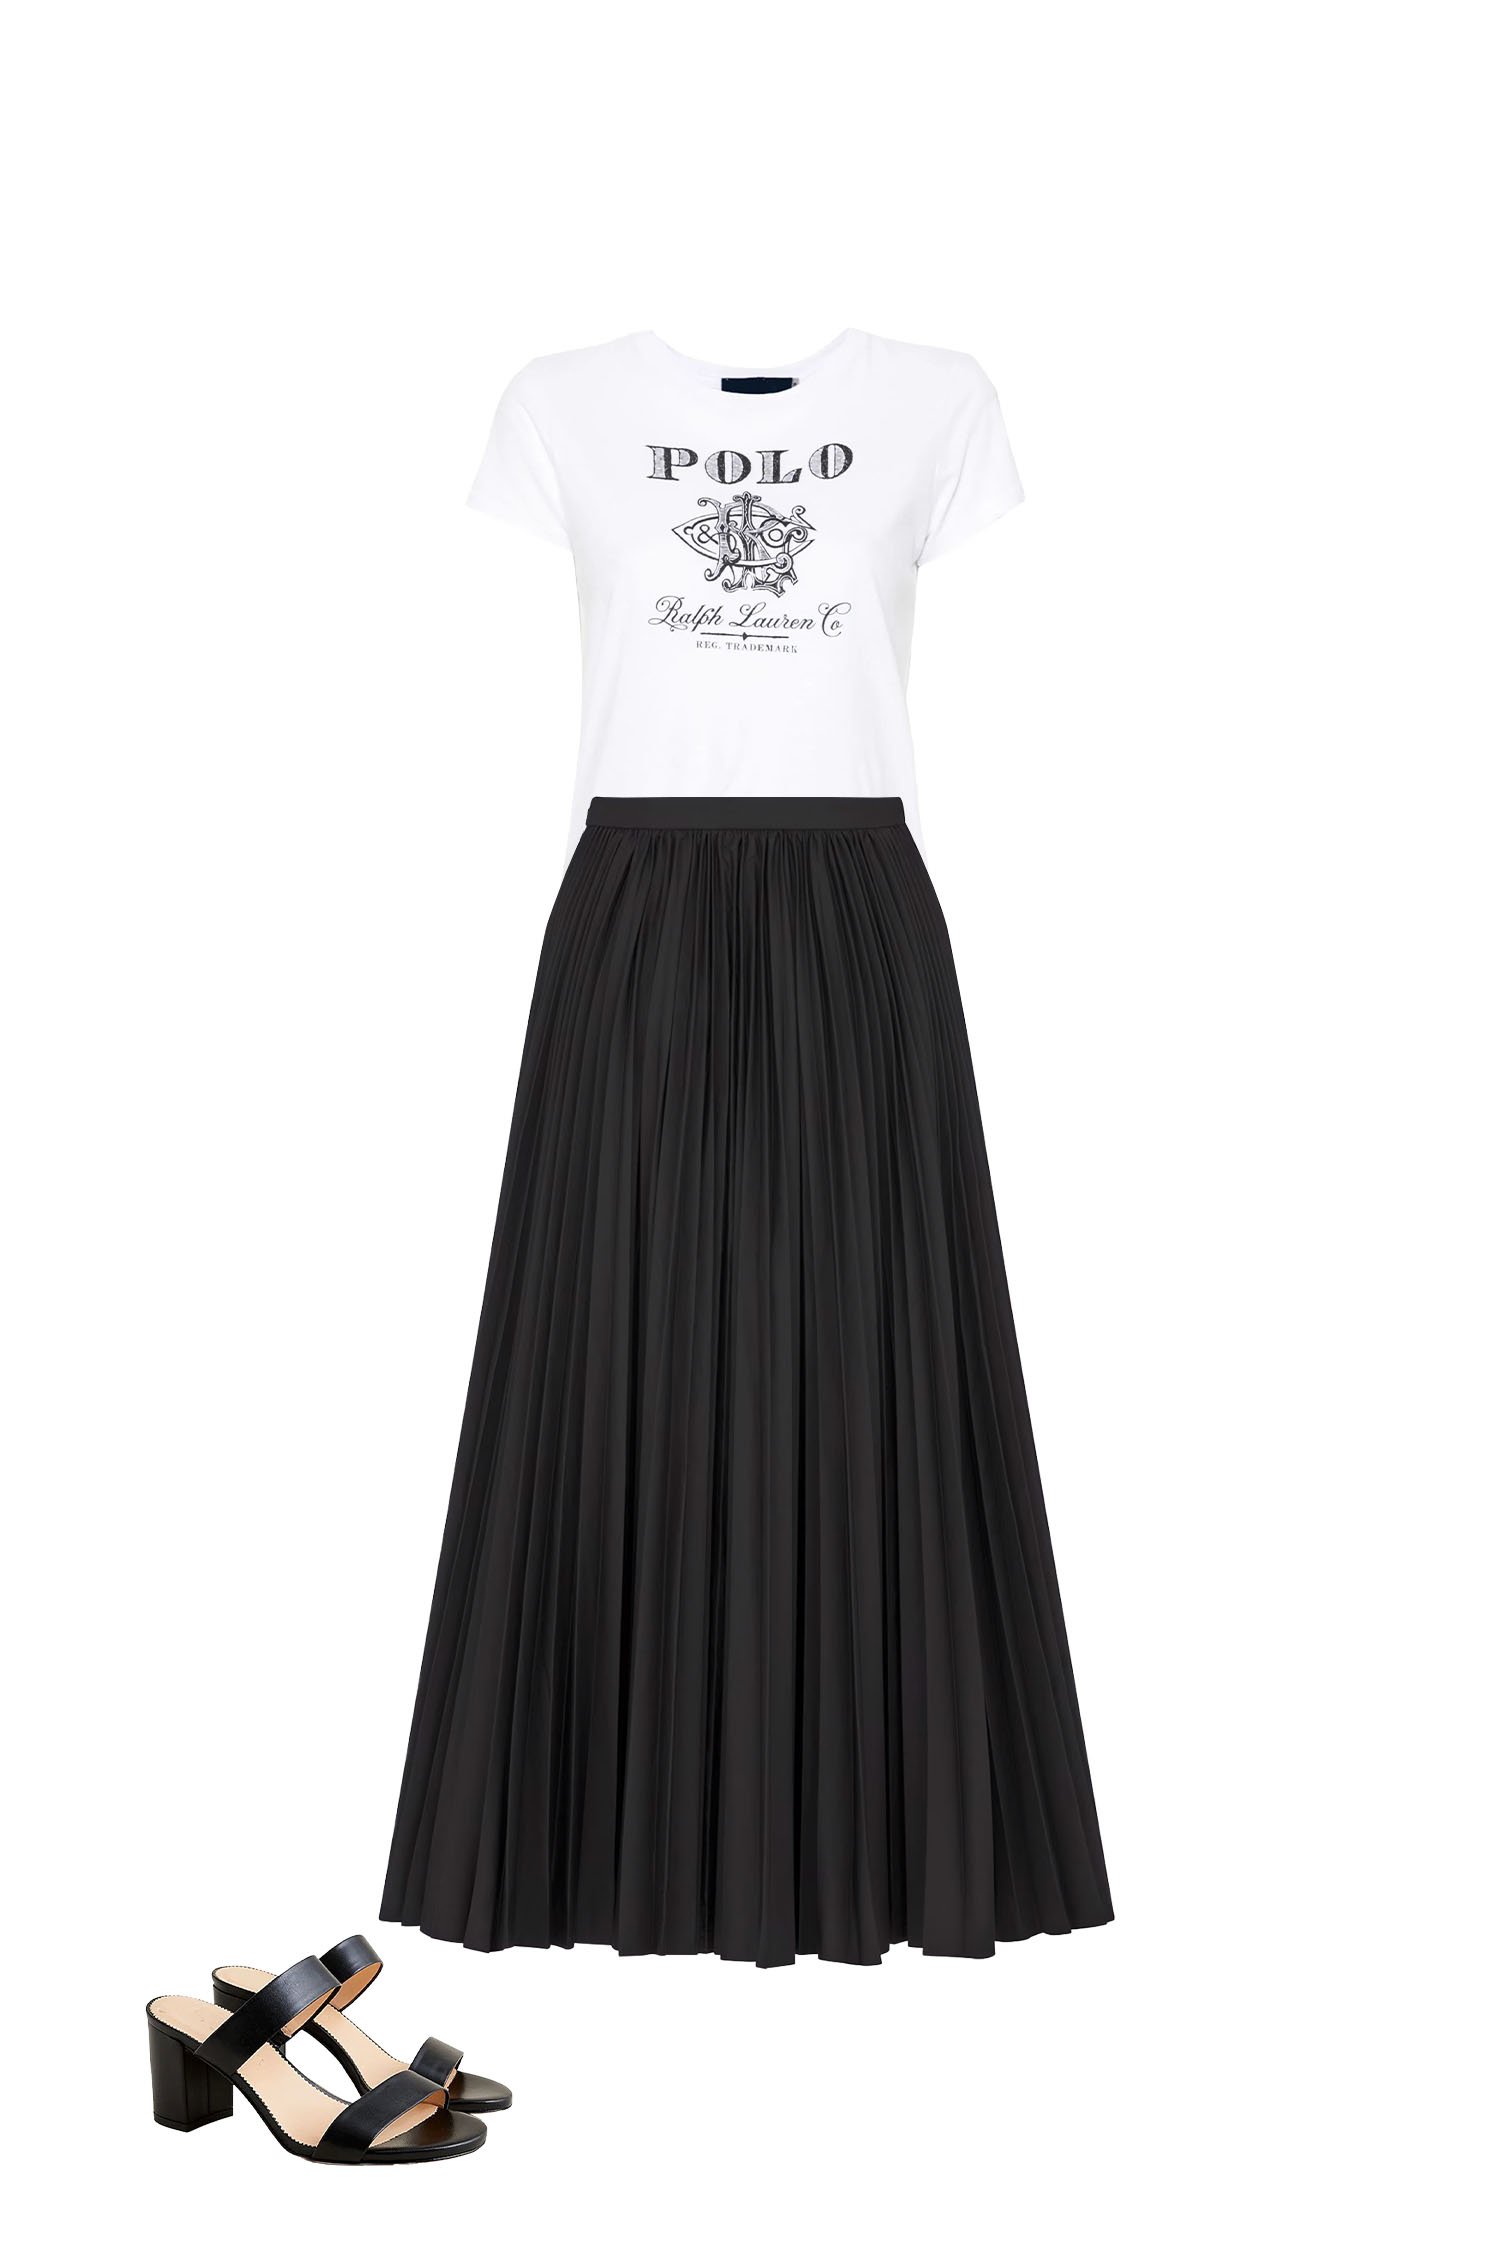 Black Pleated Skirt Outfit with White Graphic Print T-shirt and Black Block Heeled Sandals